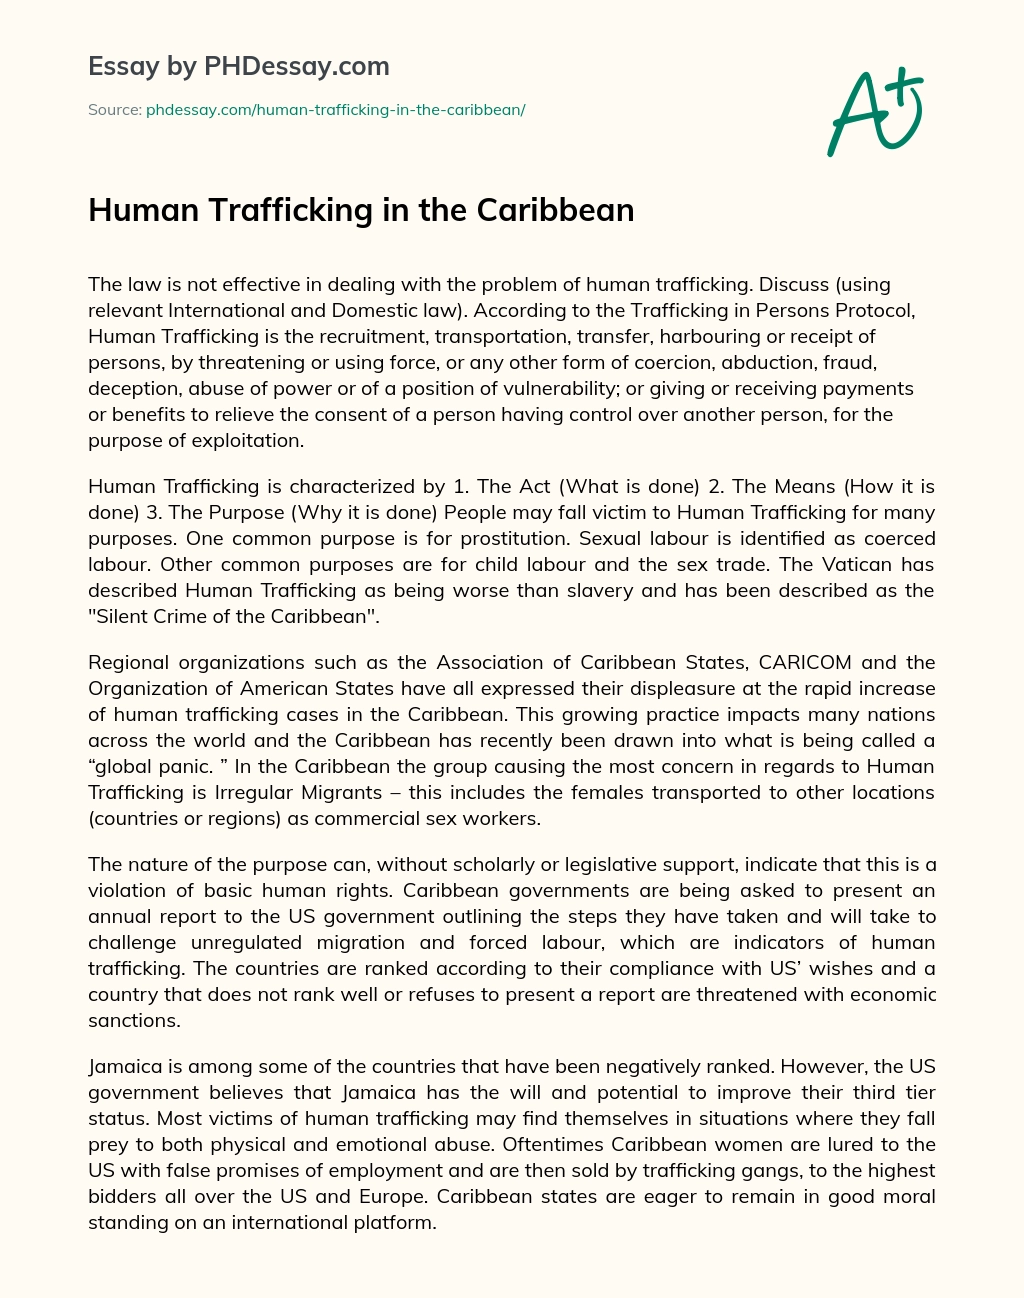 Human Trafficking in the Caribbean essay